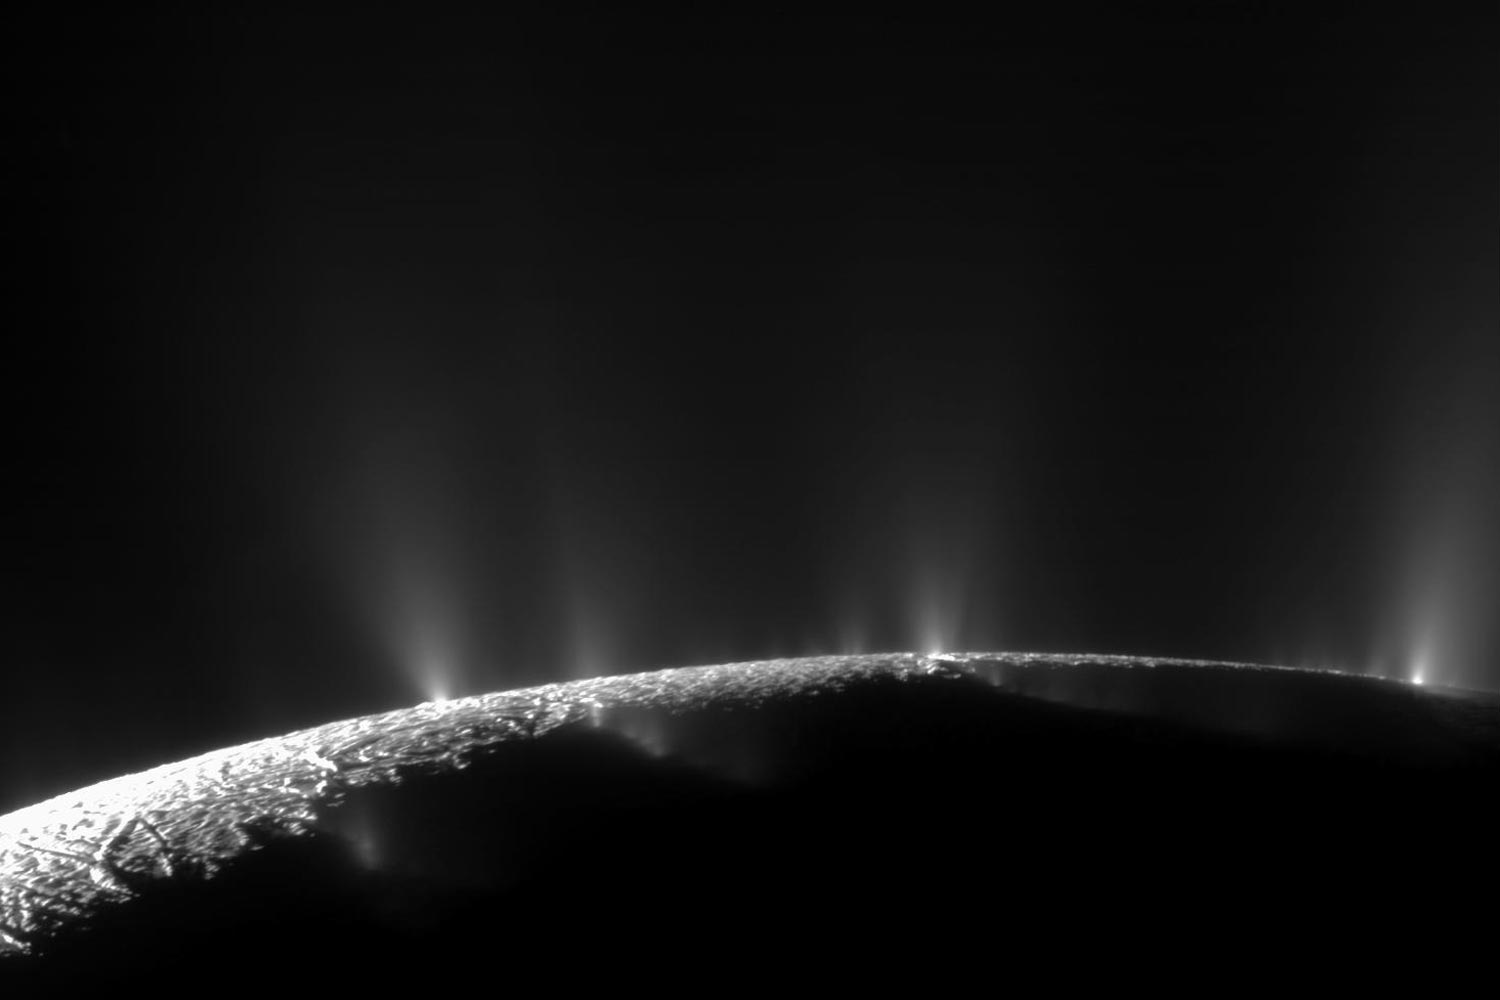 Enceladus has plumes of water ice and vapor come out of its surface